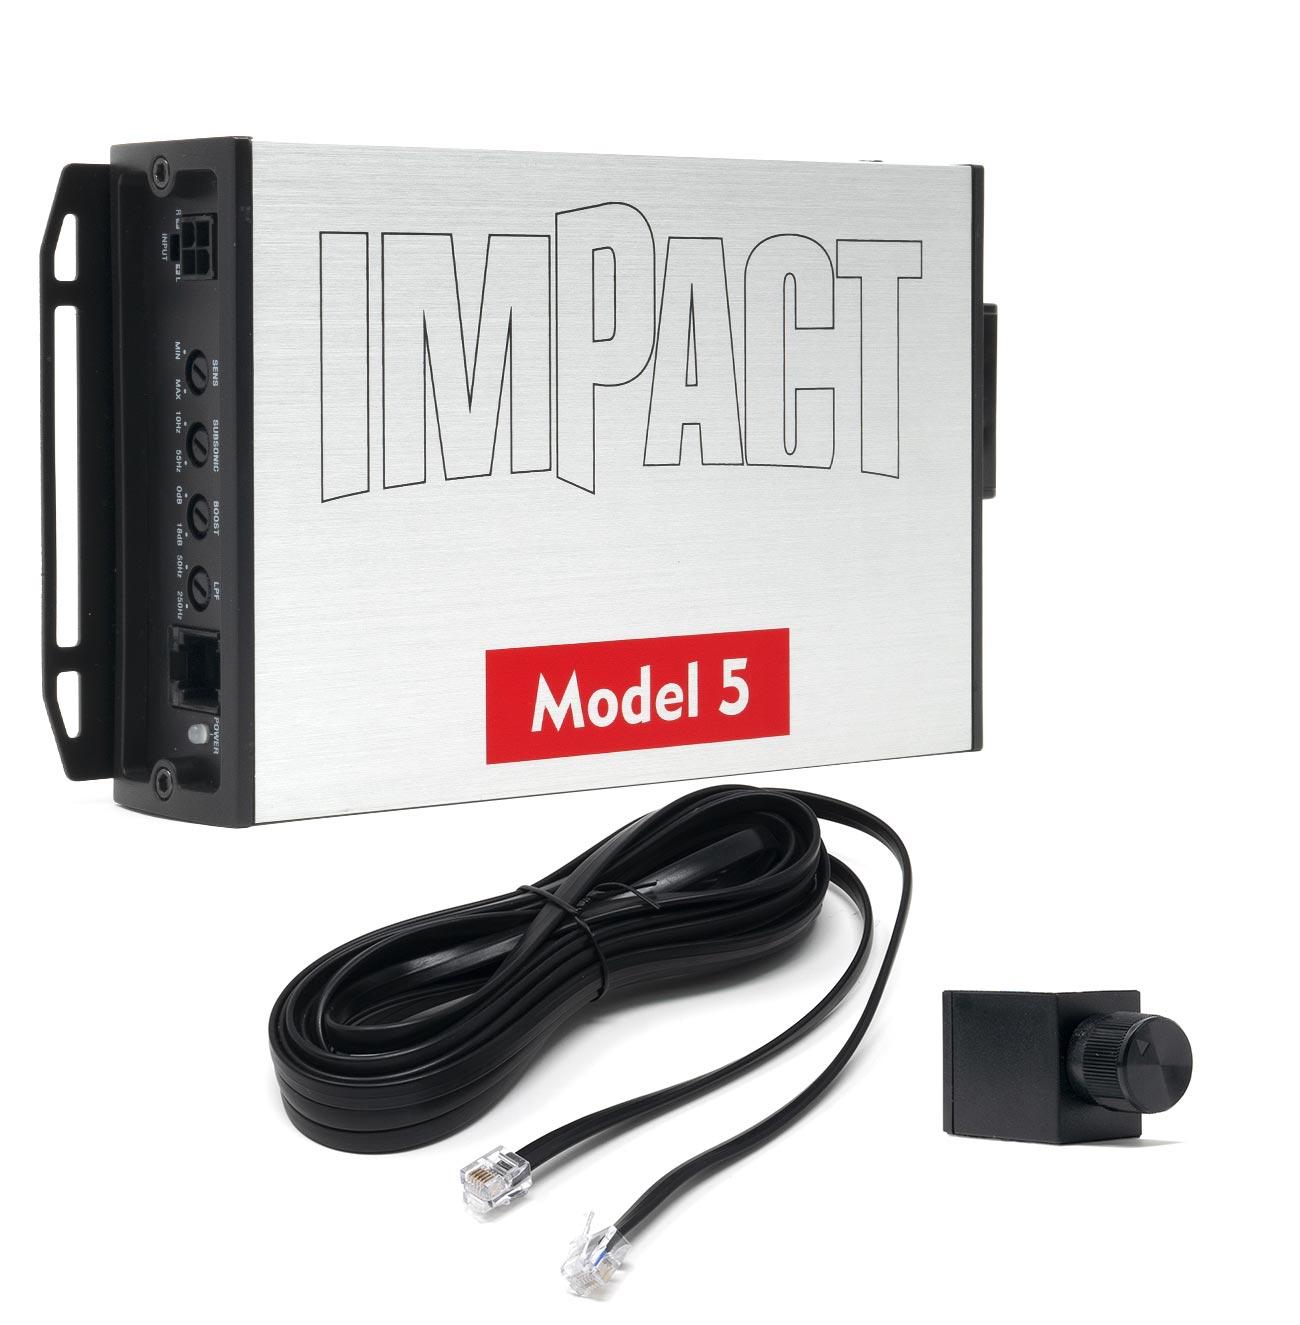 0215 - MODEL 5-AMPLIFICATORE IMPACT 700 W max - 1 CANALE - per SUBWOOFER